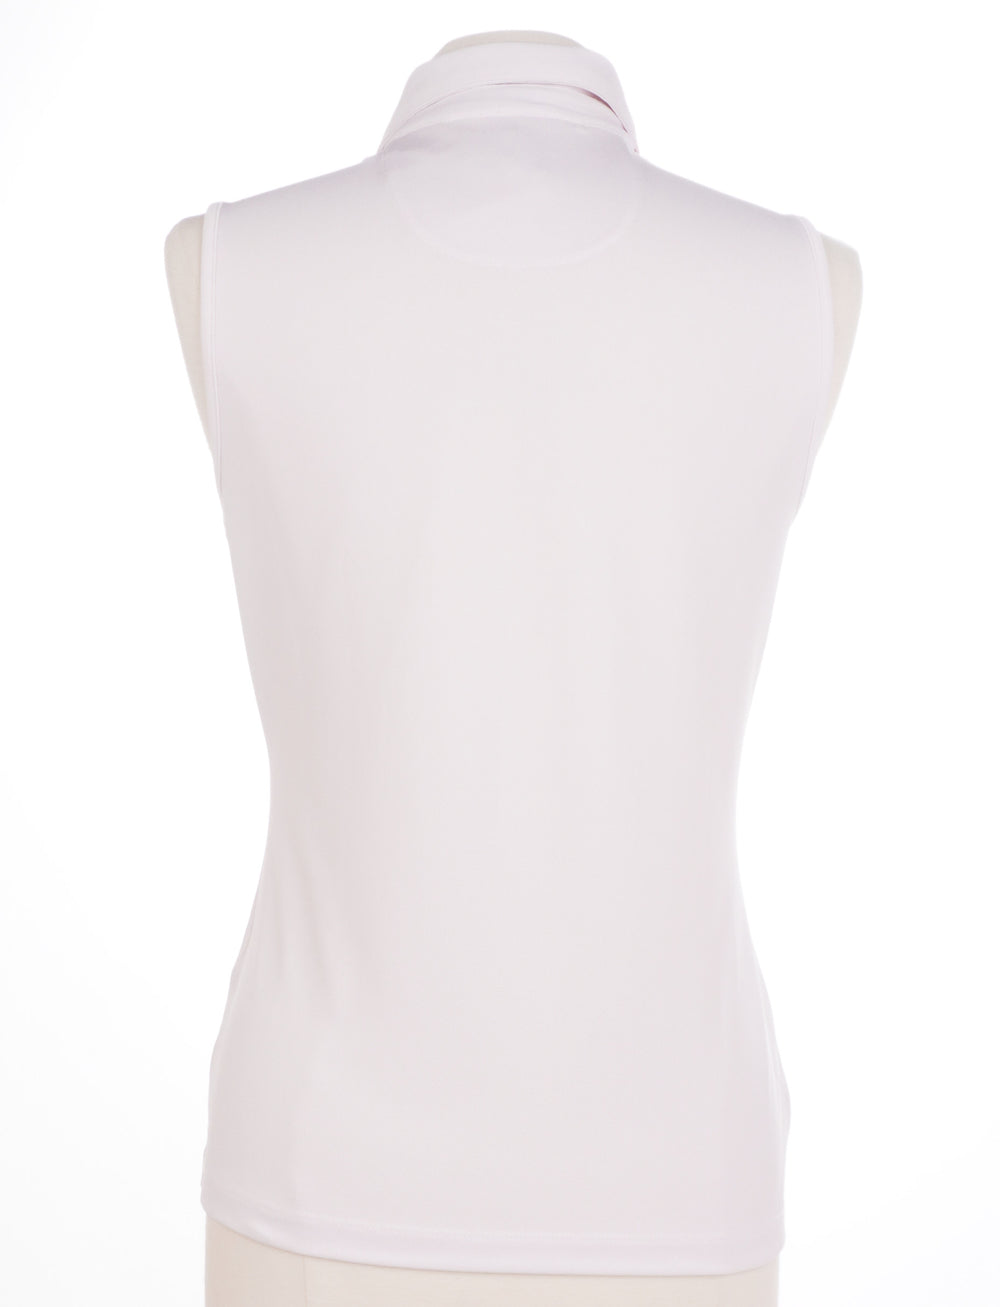 EP Pro Color Block Sleeveless Top - Size Small - Skorzie